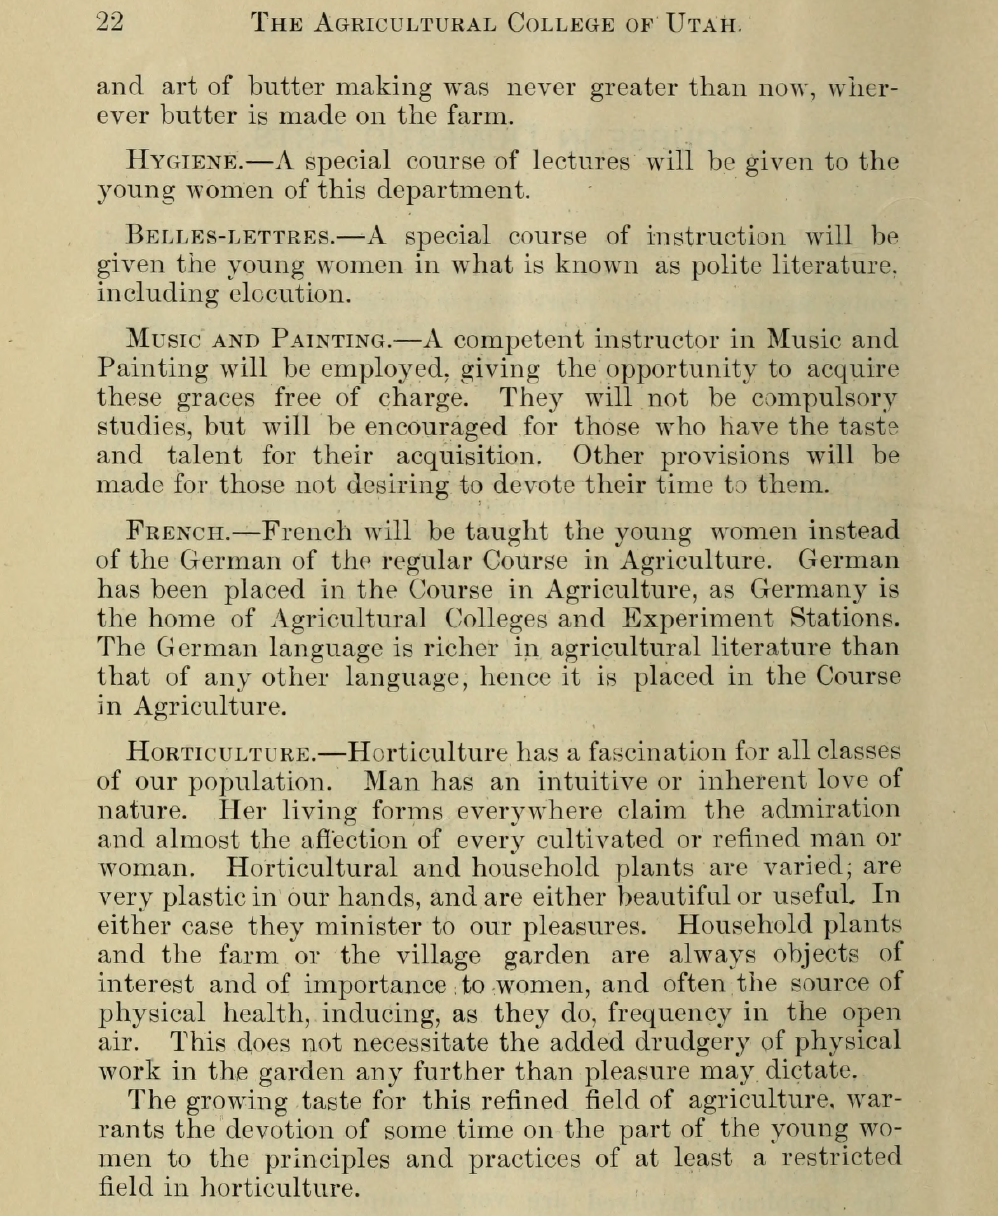 The second of a two-paged excerpt from the Agricultural College of Utah coursebook that outlines classes for young women studying Domestic Arts. 